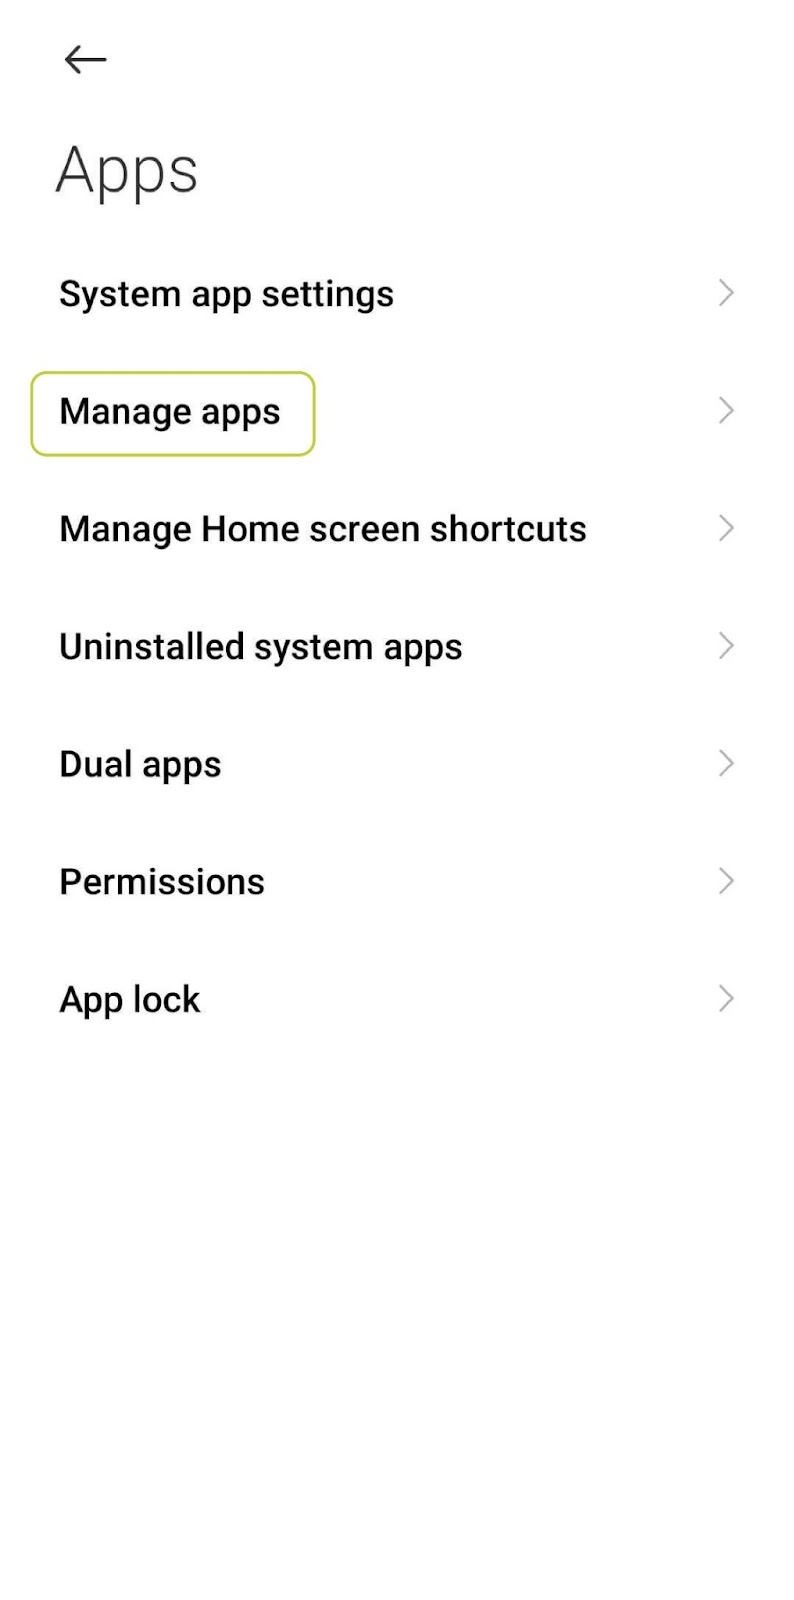 Tap on Manage apps.